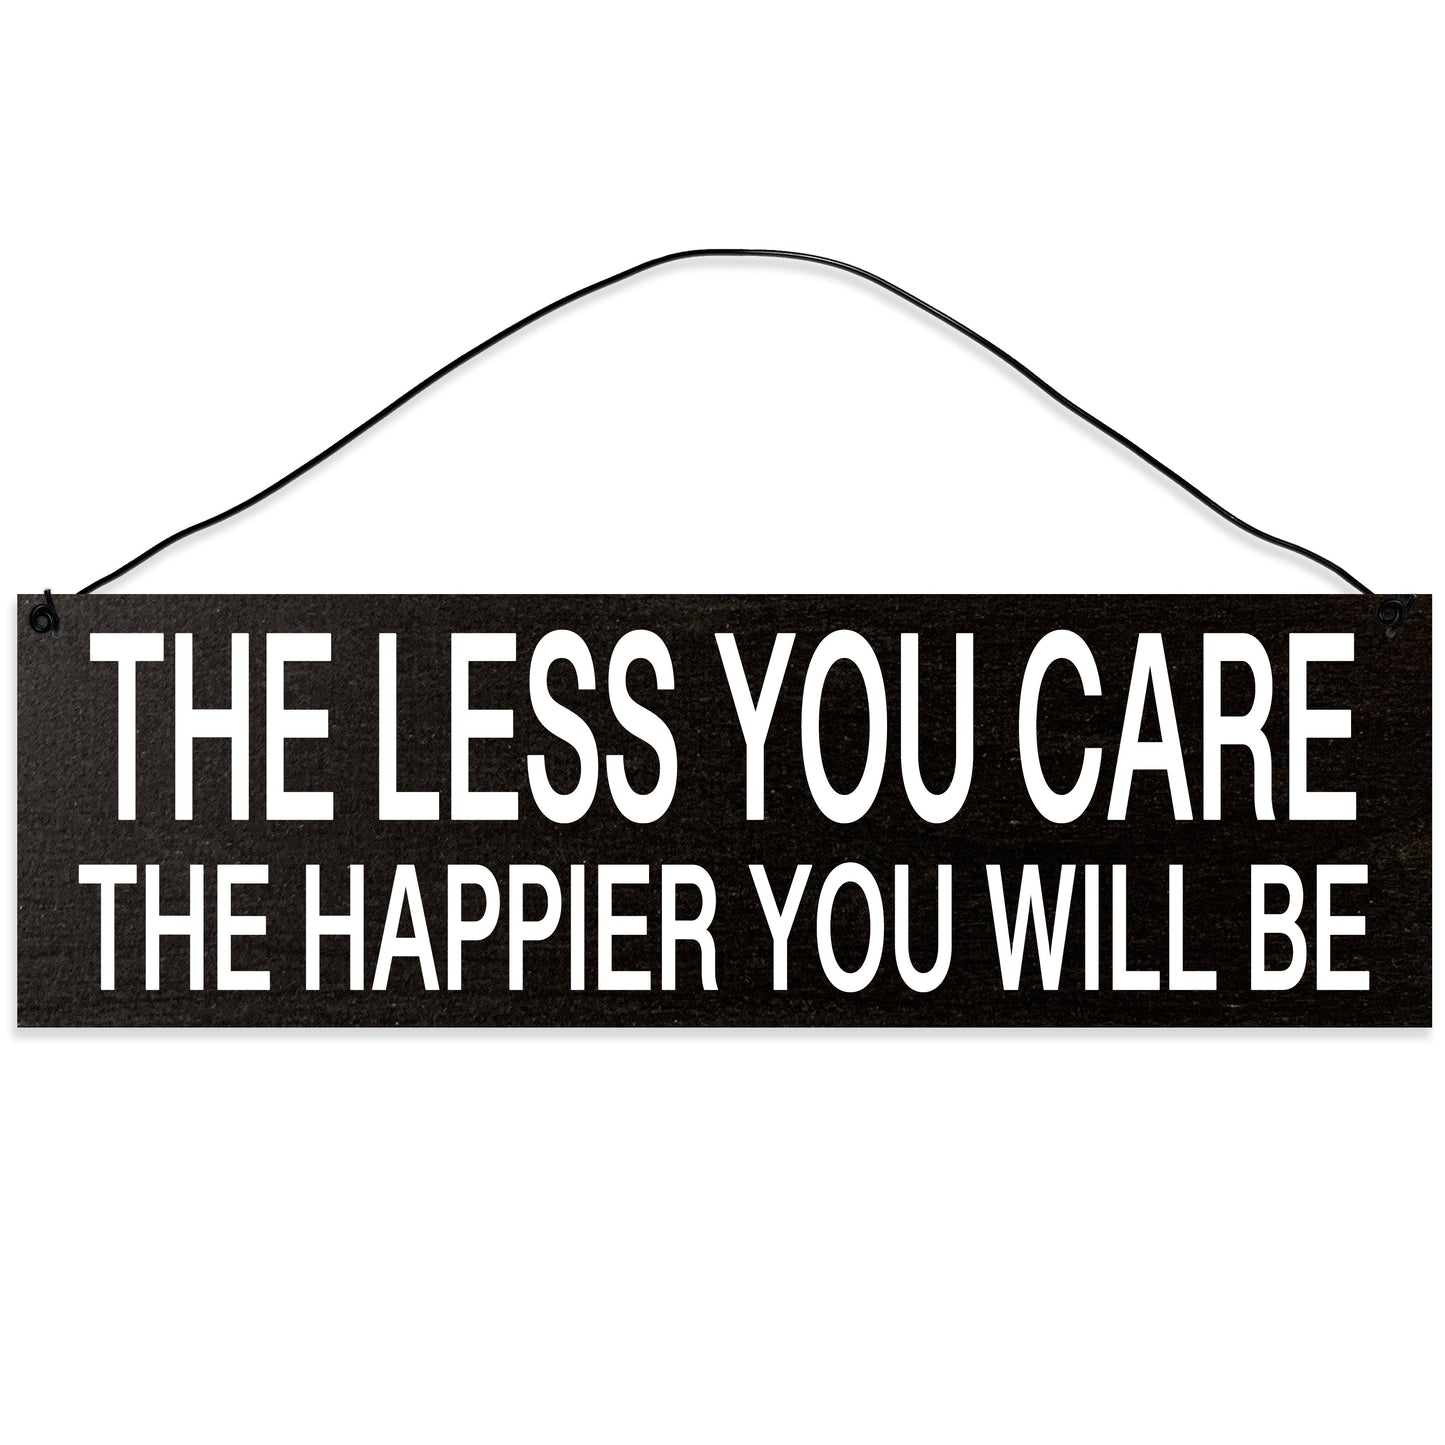 Sawyer's Mill - The Less You Care, the Happier You Will Be. Wood Sign for Home or Office. Measures 3x10 inches.